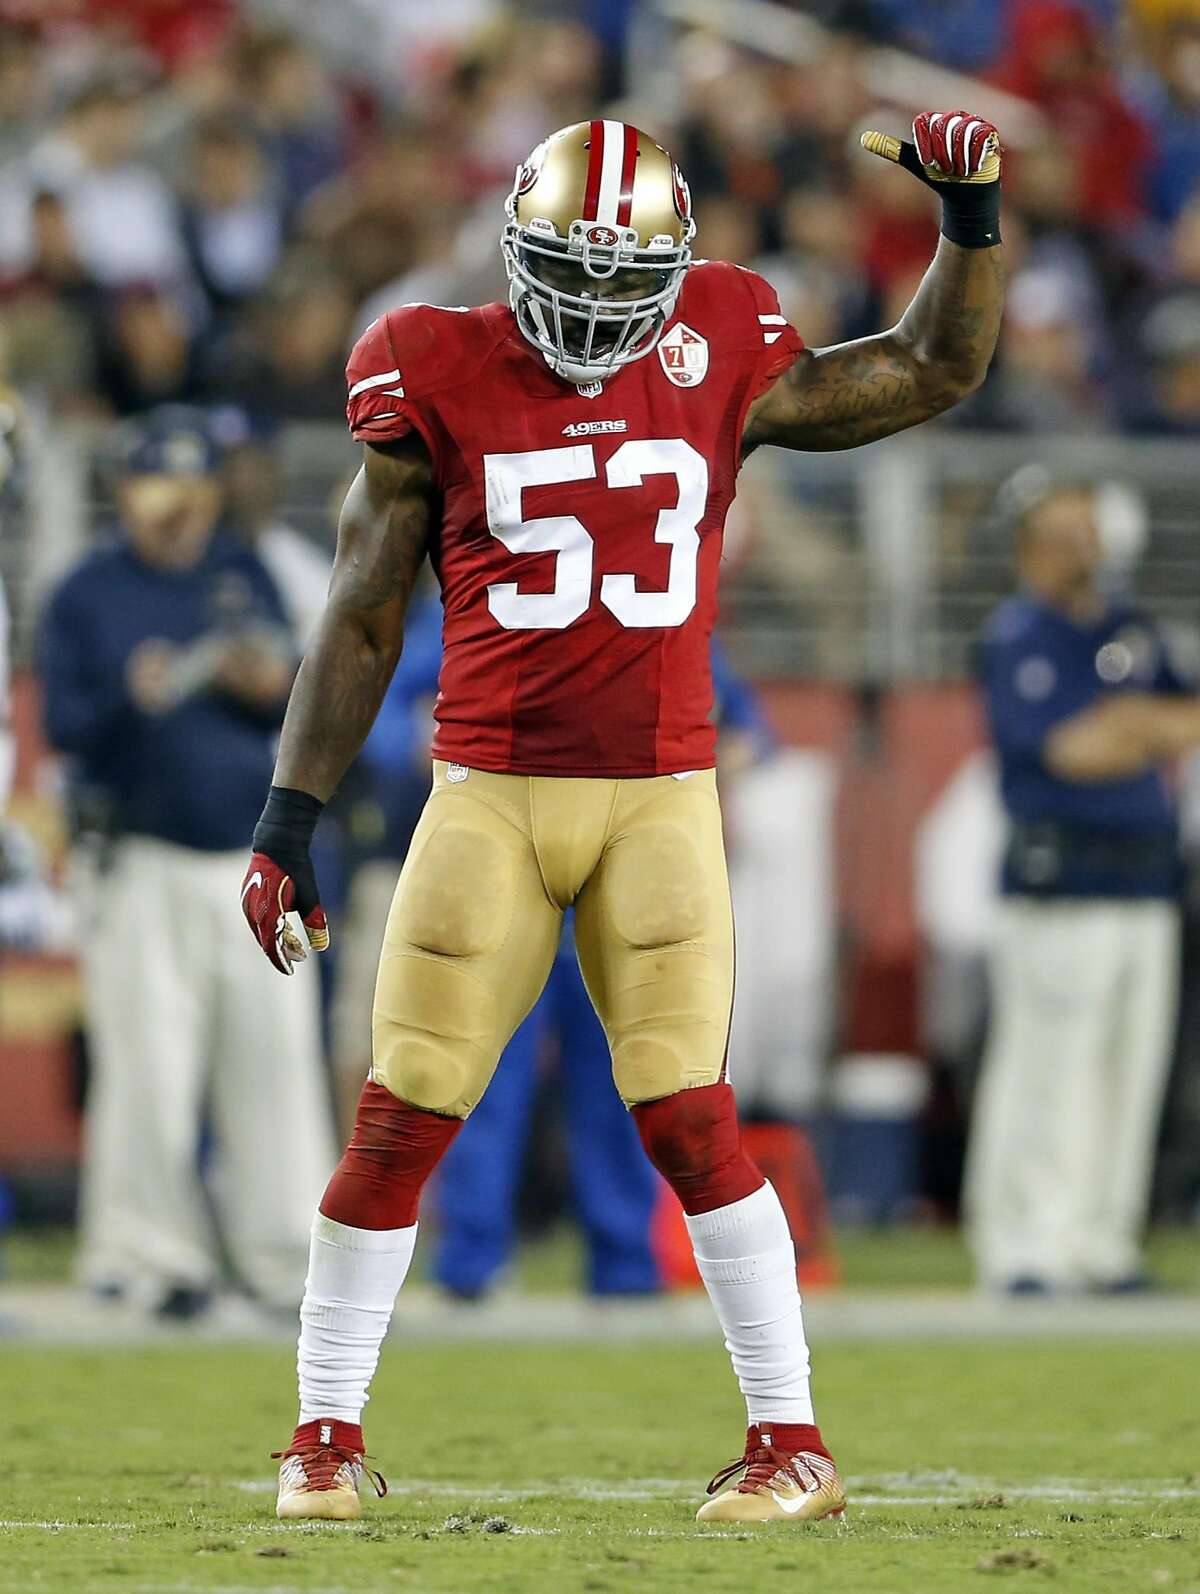 San Francisco 49ers' NaVorro Bowman against Los Angeles Rams during NFL game at Levi's Stadium in Santa Clara, Calif., on Monday, September 12, 2016.